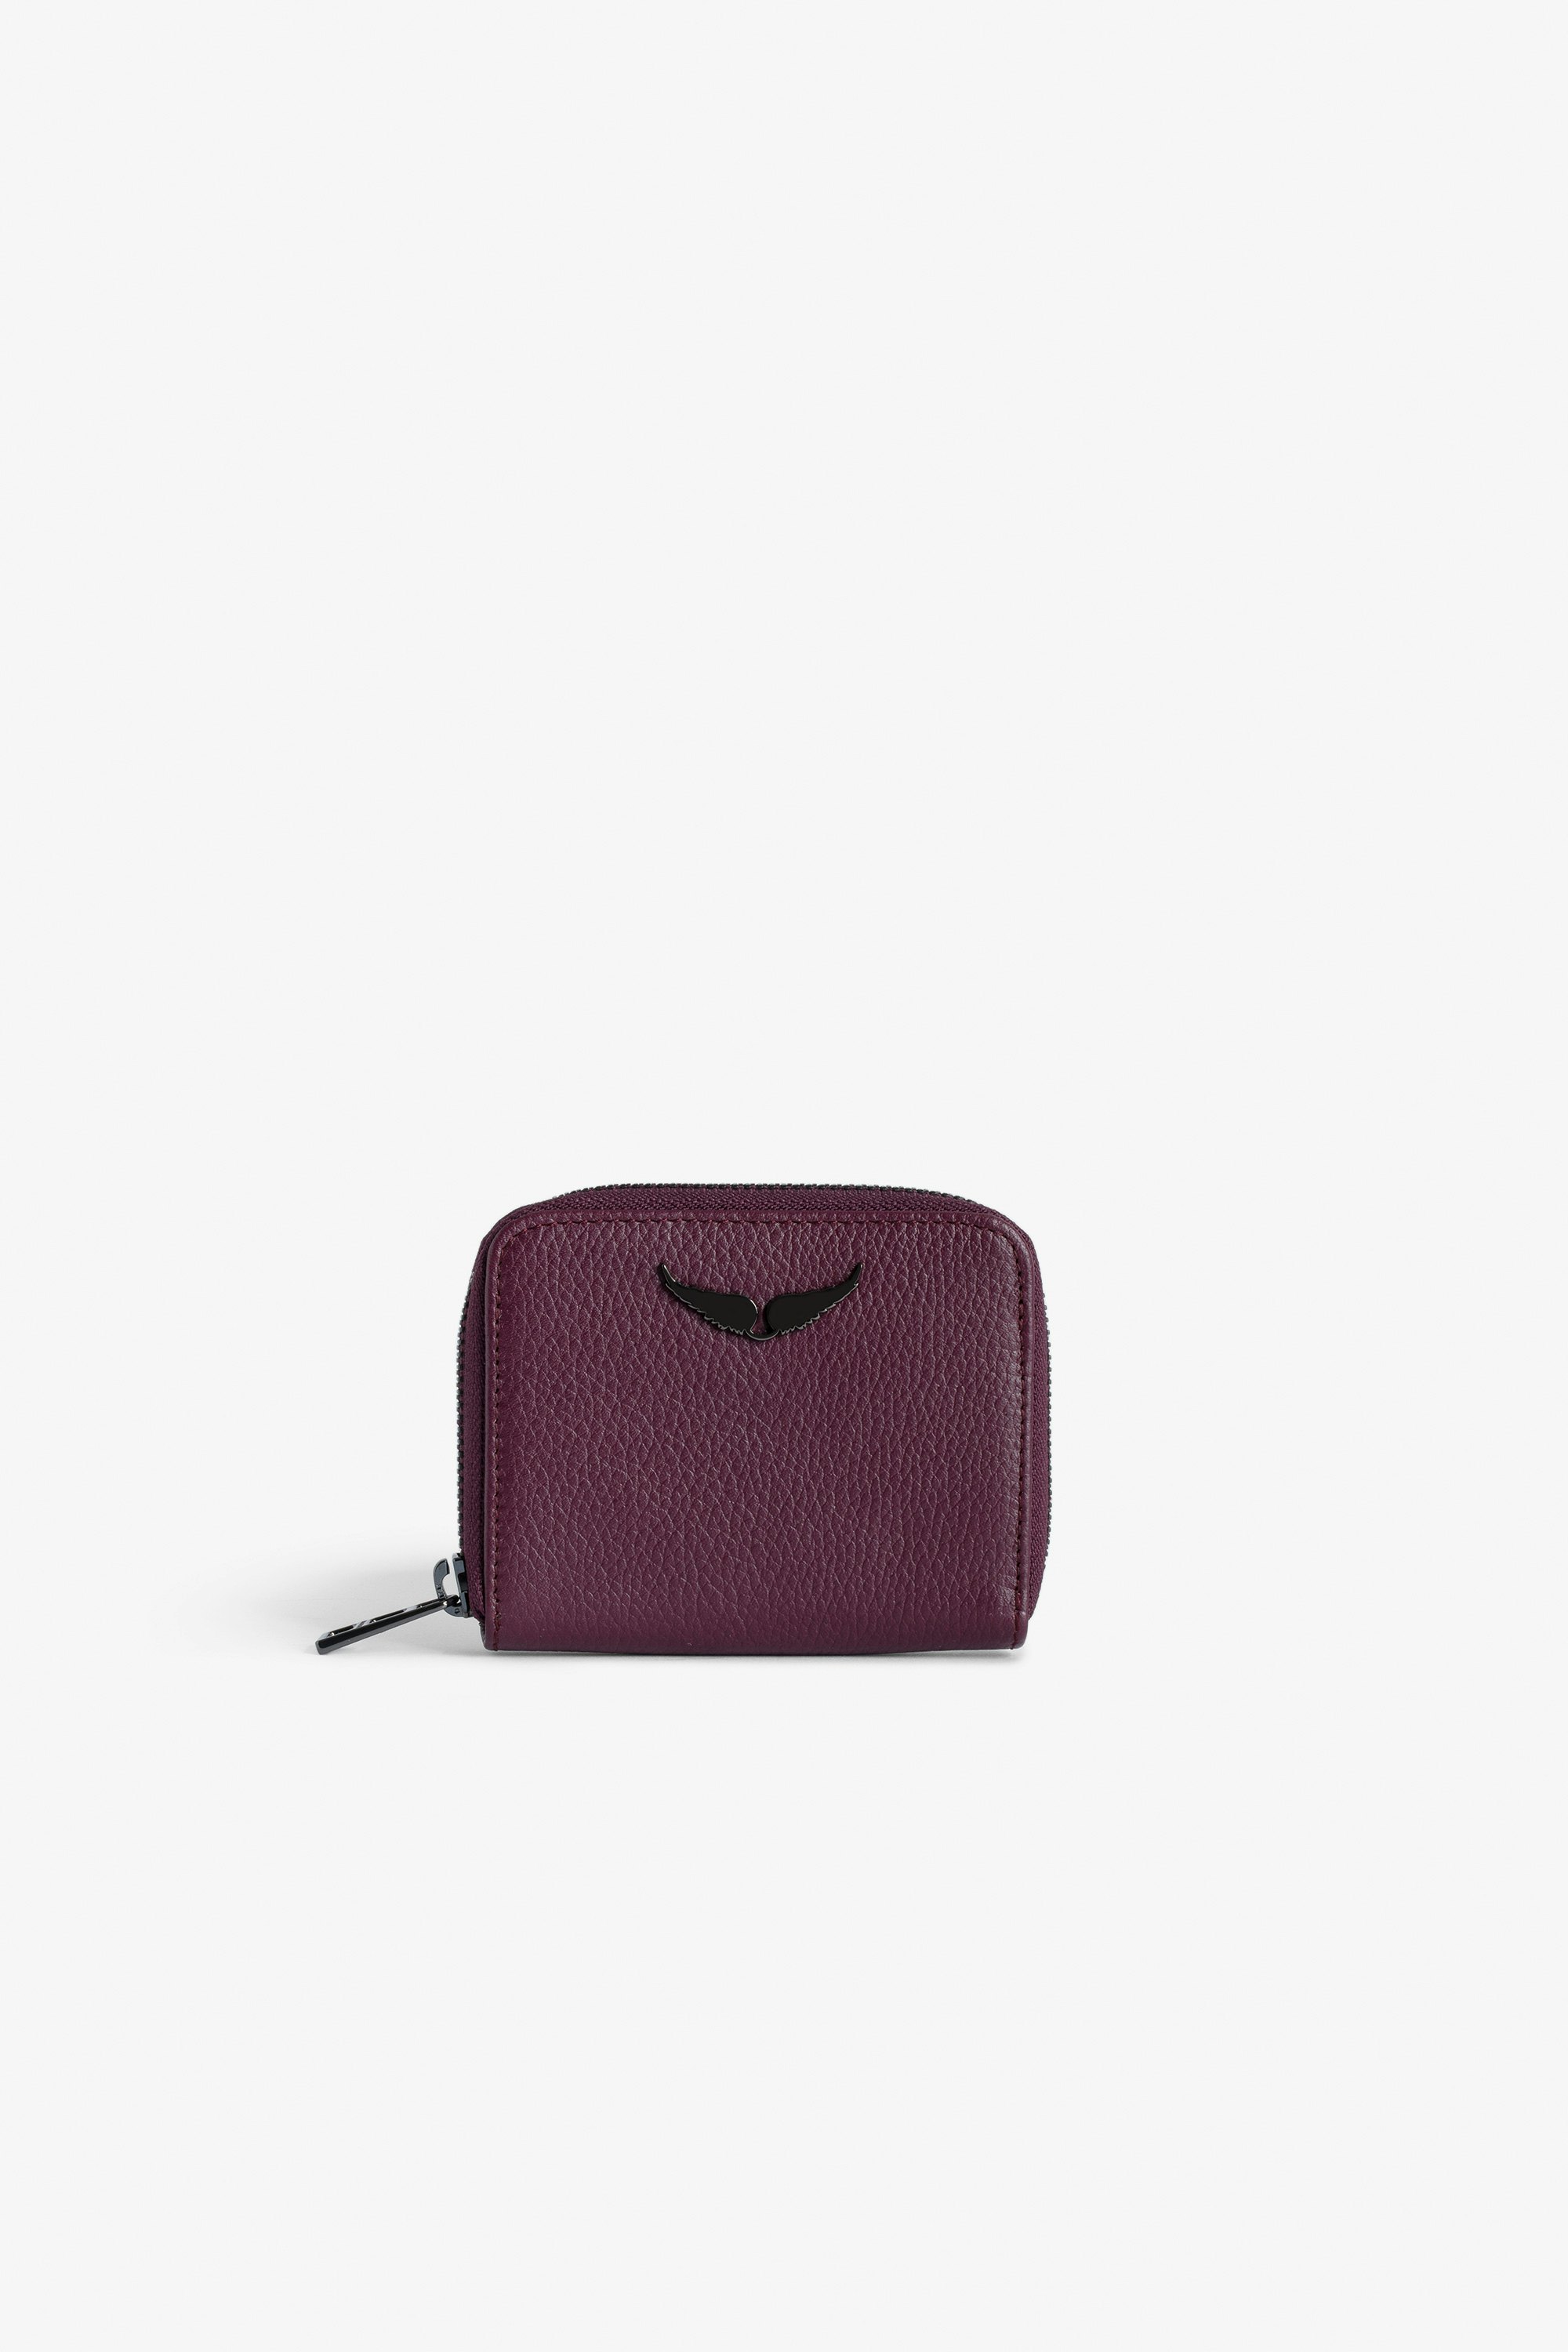 Mini ZV Coin 財布 Women’s burgundy grained leather wallet with wings charm.